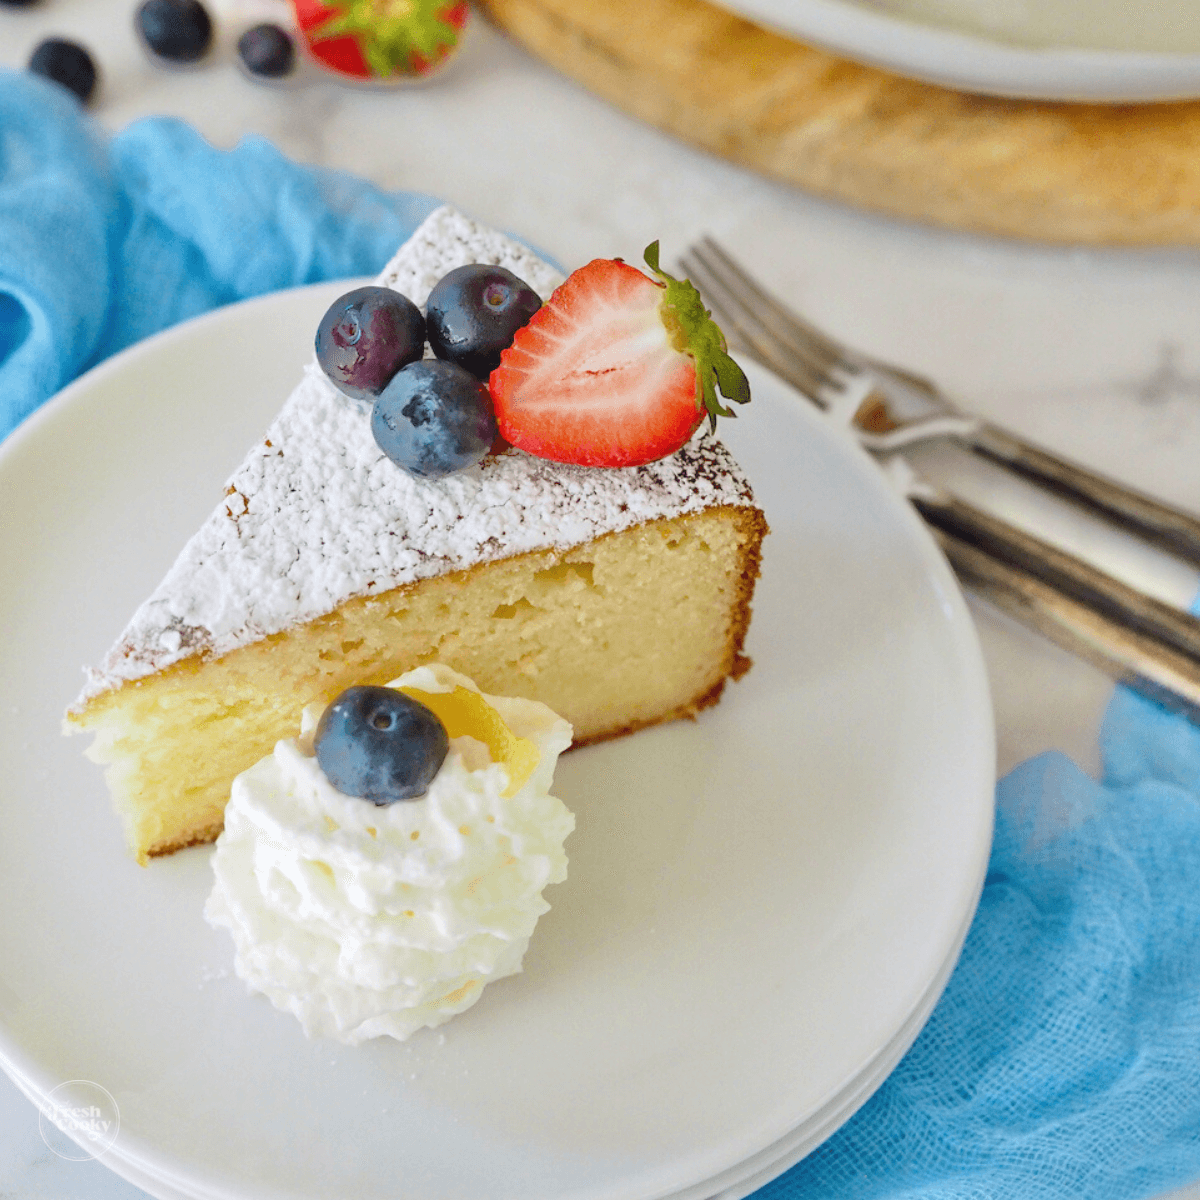 Lemon ricotta cake recipe slice on white plate with forks behind, cake is decorated with whipped cream and berries.